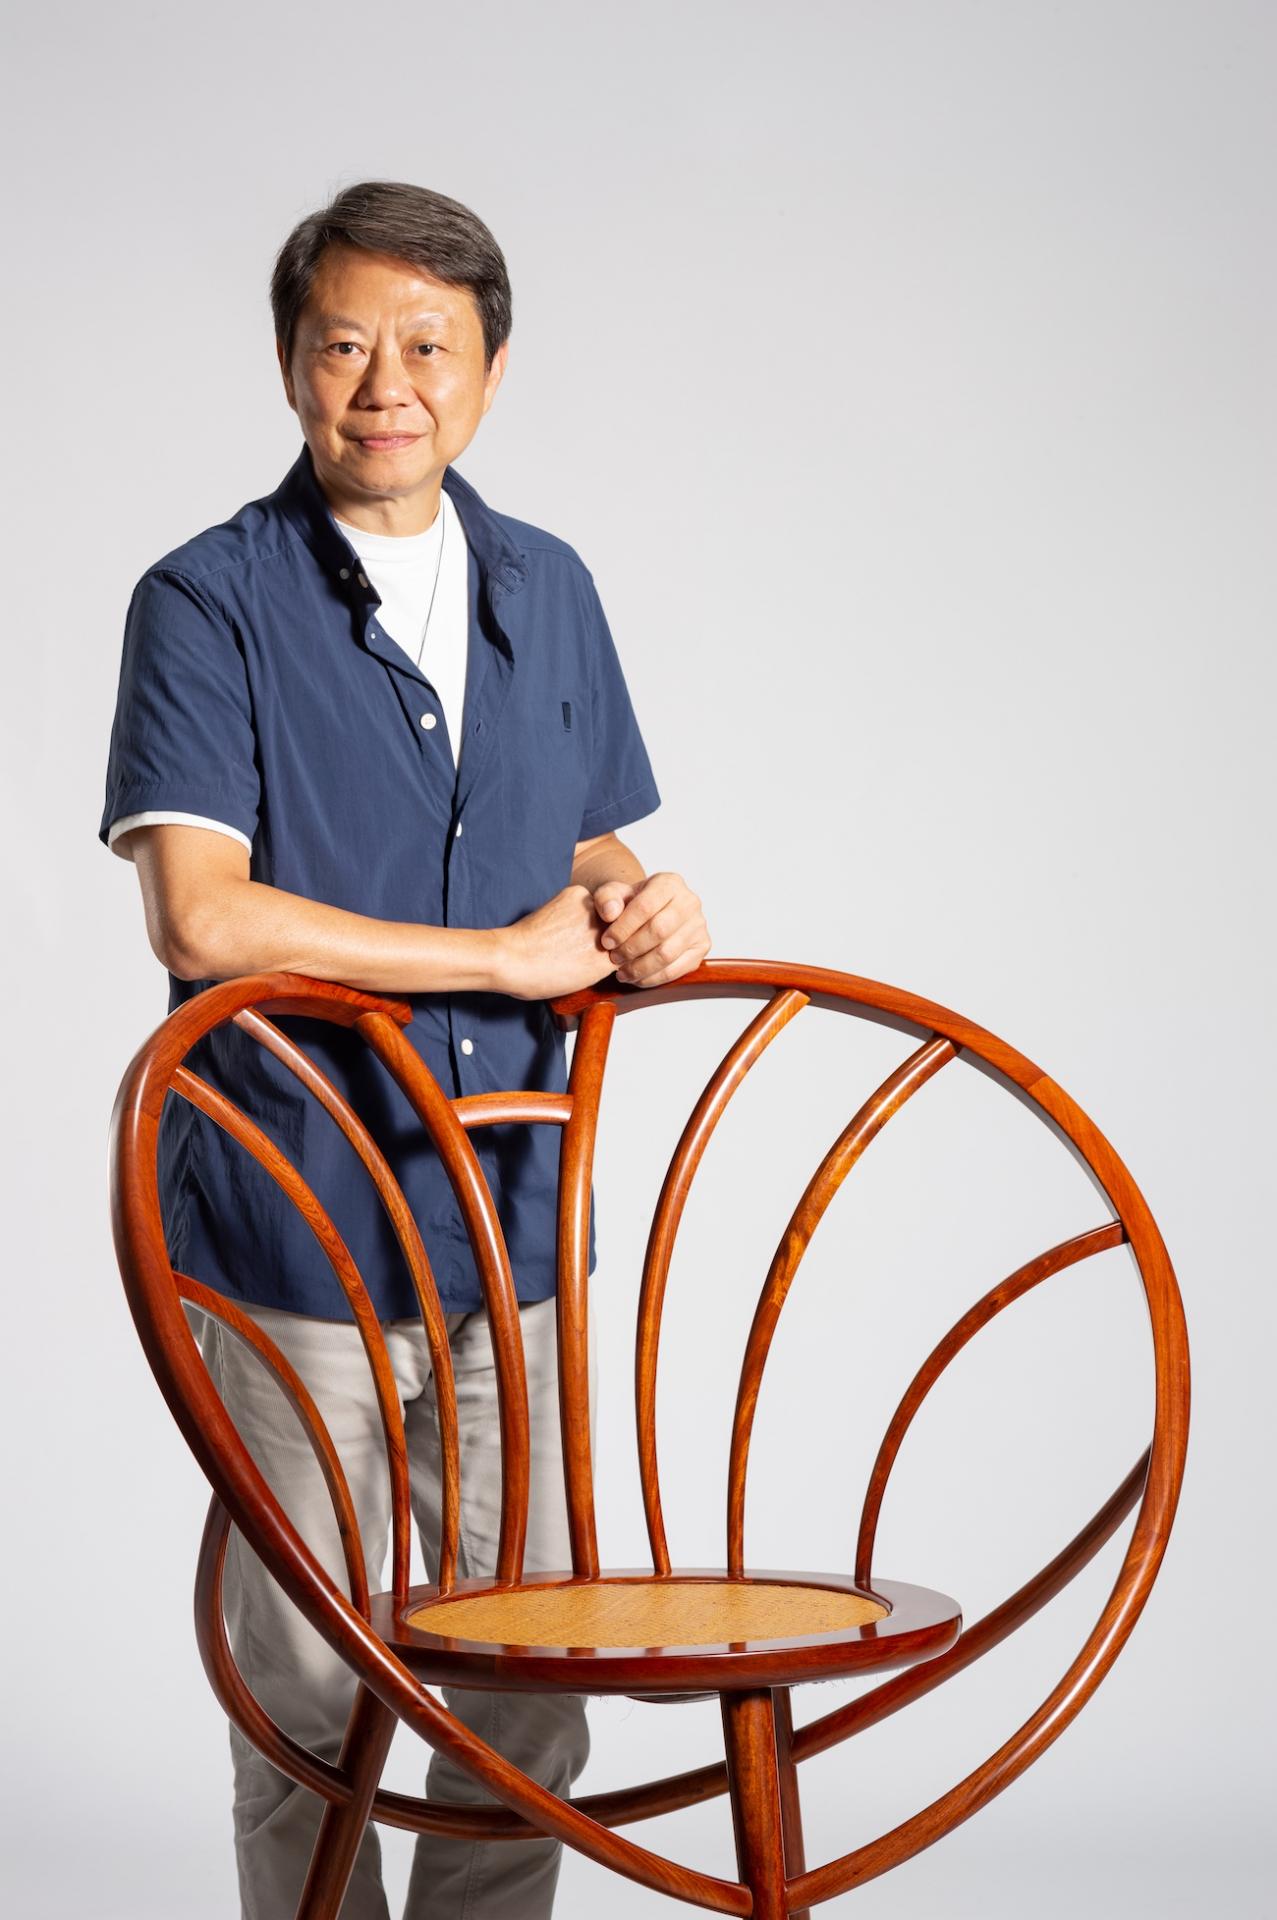 The Art of Chinese Woodcraft With Ji Qing Tang Founder Charles Leung